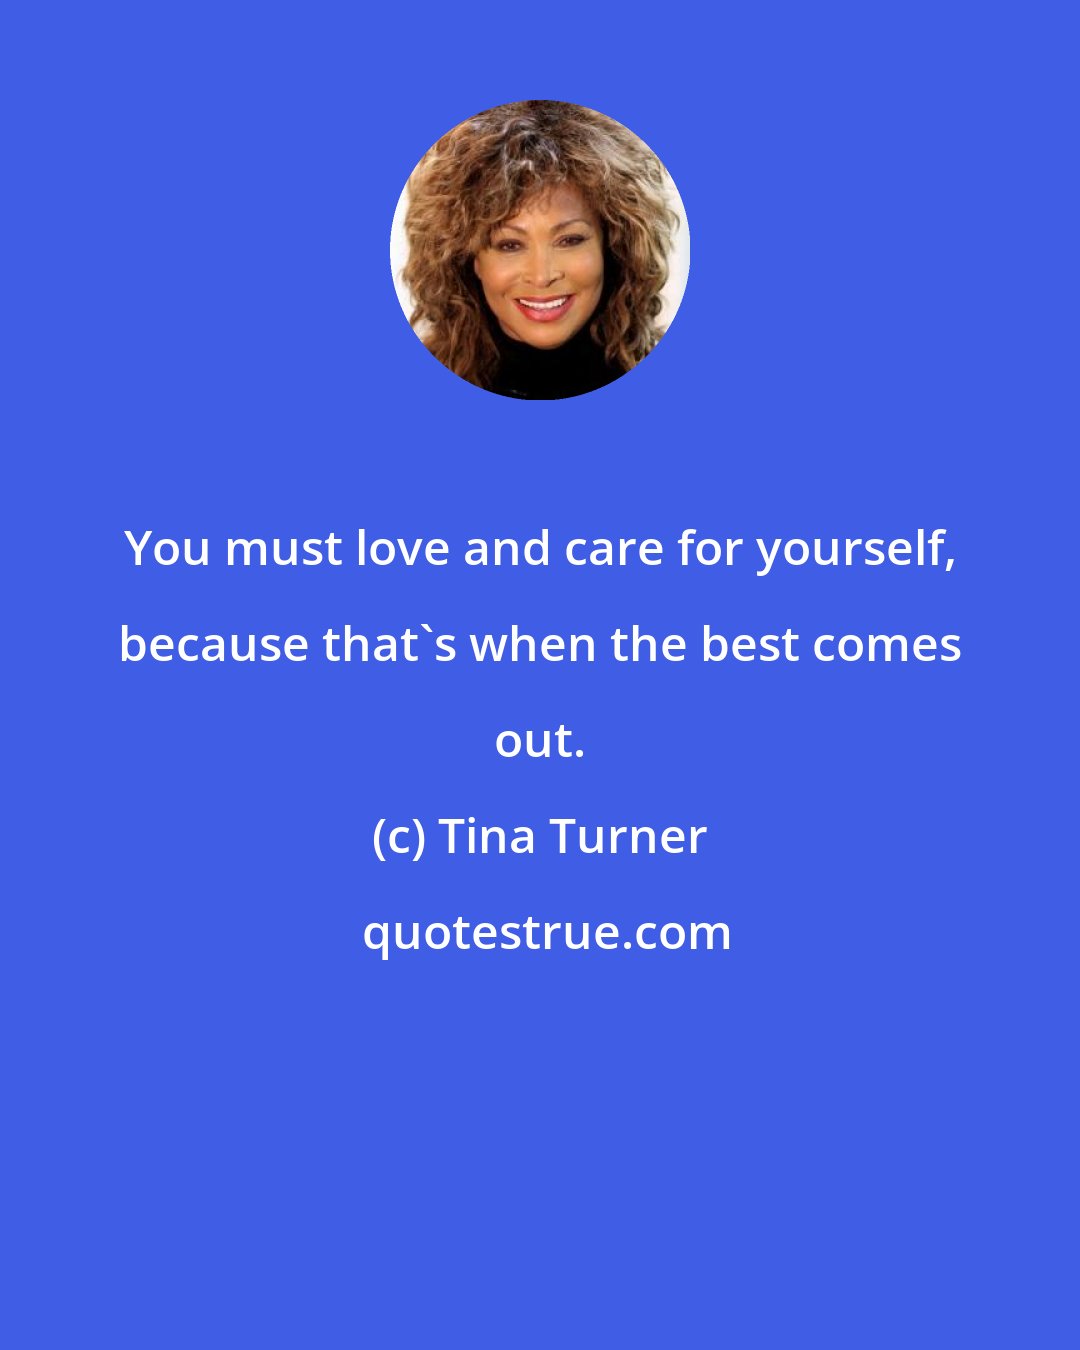 Tina Turner: You must love and care for yourself, because that's when the best comes out.